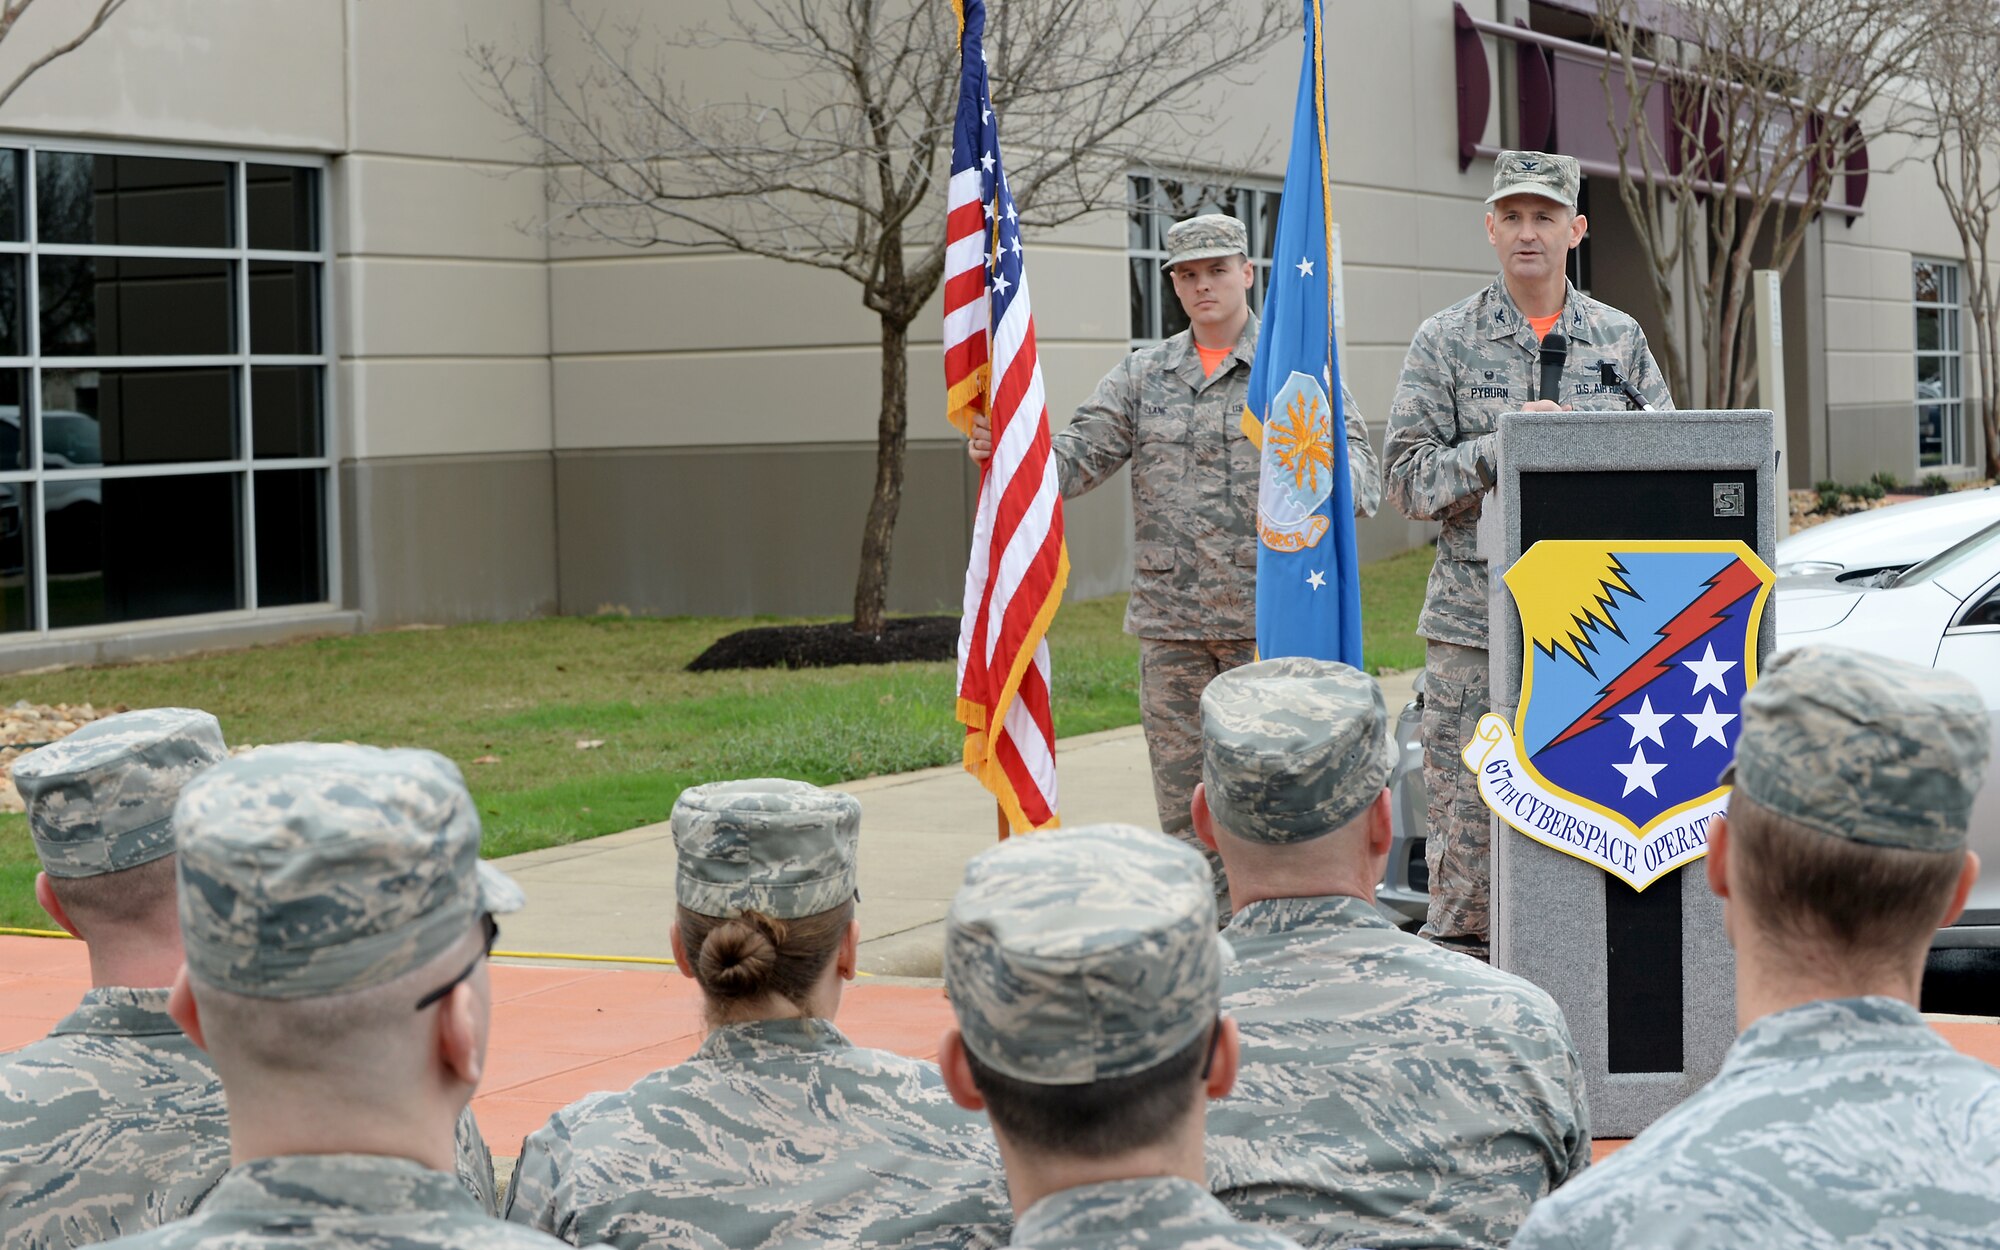 Col. Bradley Pyburn, 67th Cyberspace Wing commander, shares his thoughts about the new offensive cyberspace operations training location during a ribbon-cutting ceremony in San Antonio, Texas, Feb. 23, 2018. The first class is scheduled for March 2018. (U.S. Air Force photo by Tech. Sgt. R.J. Biermann)